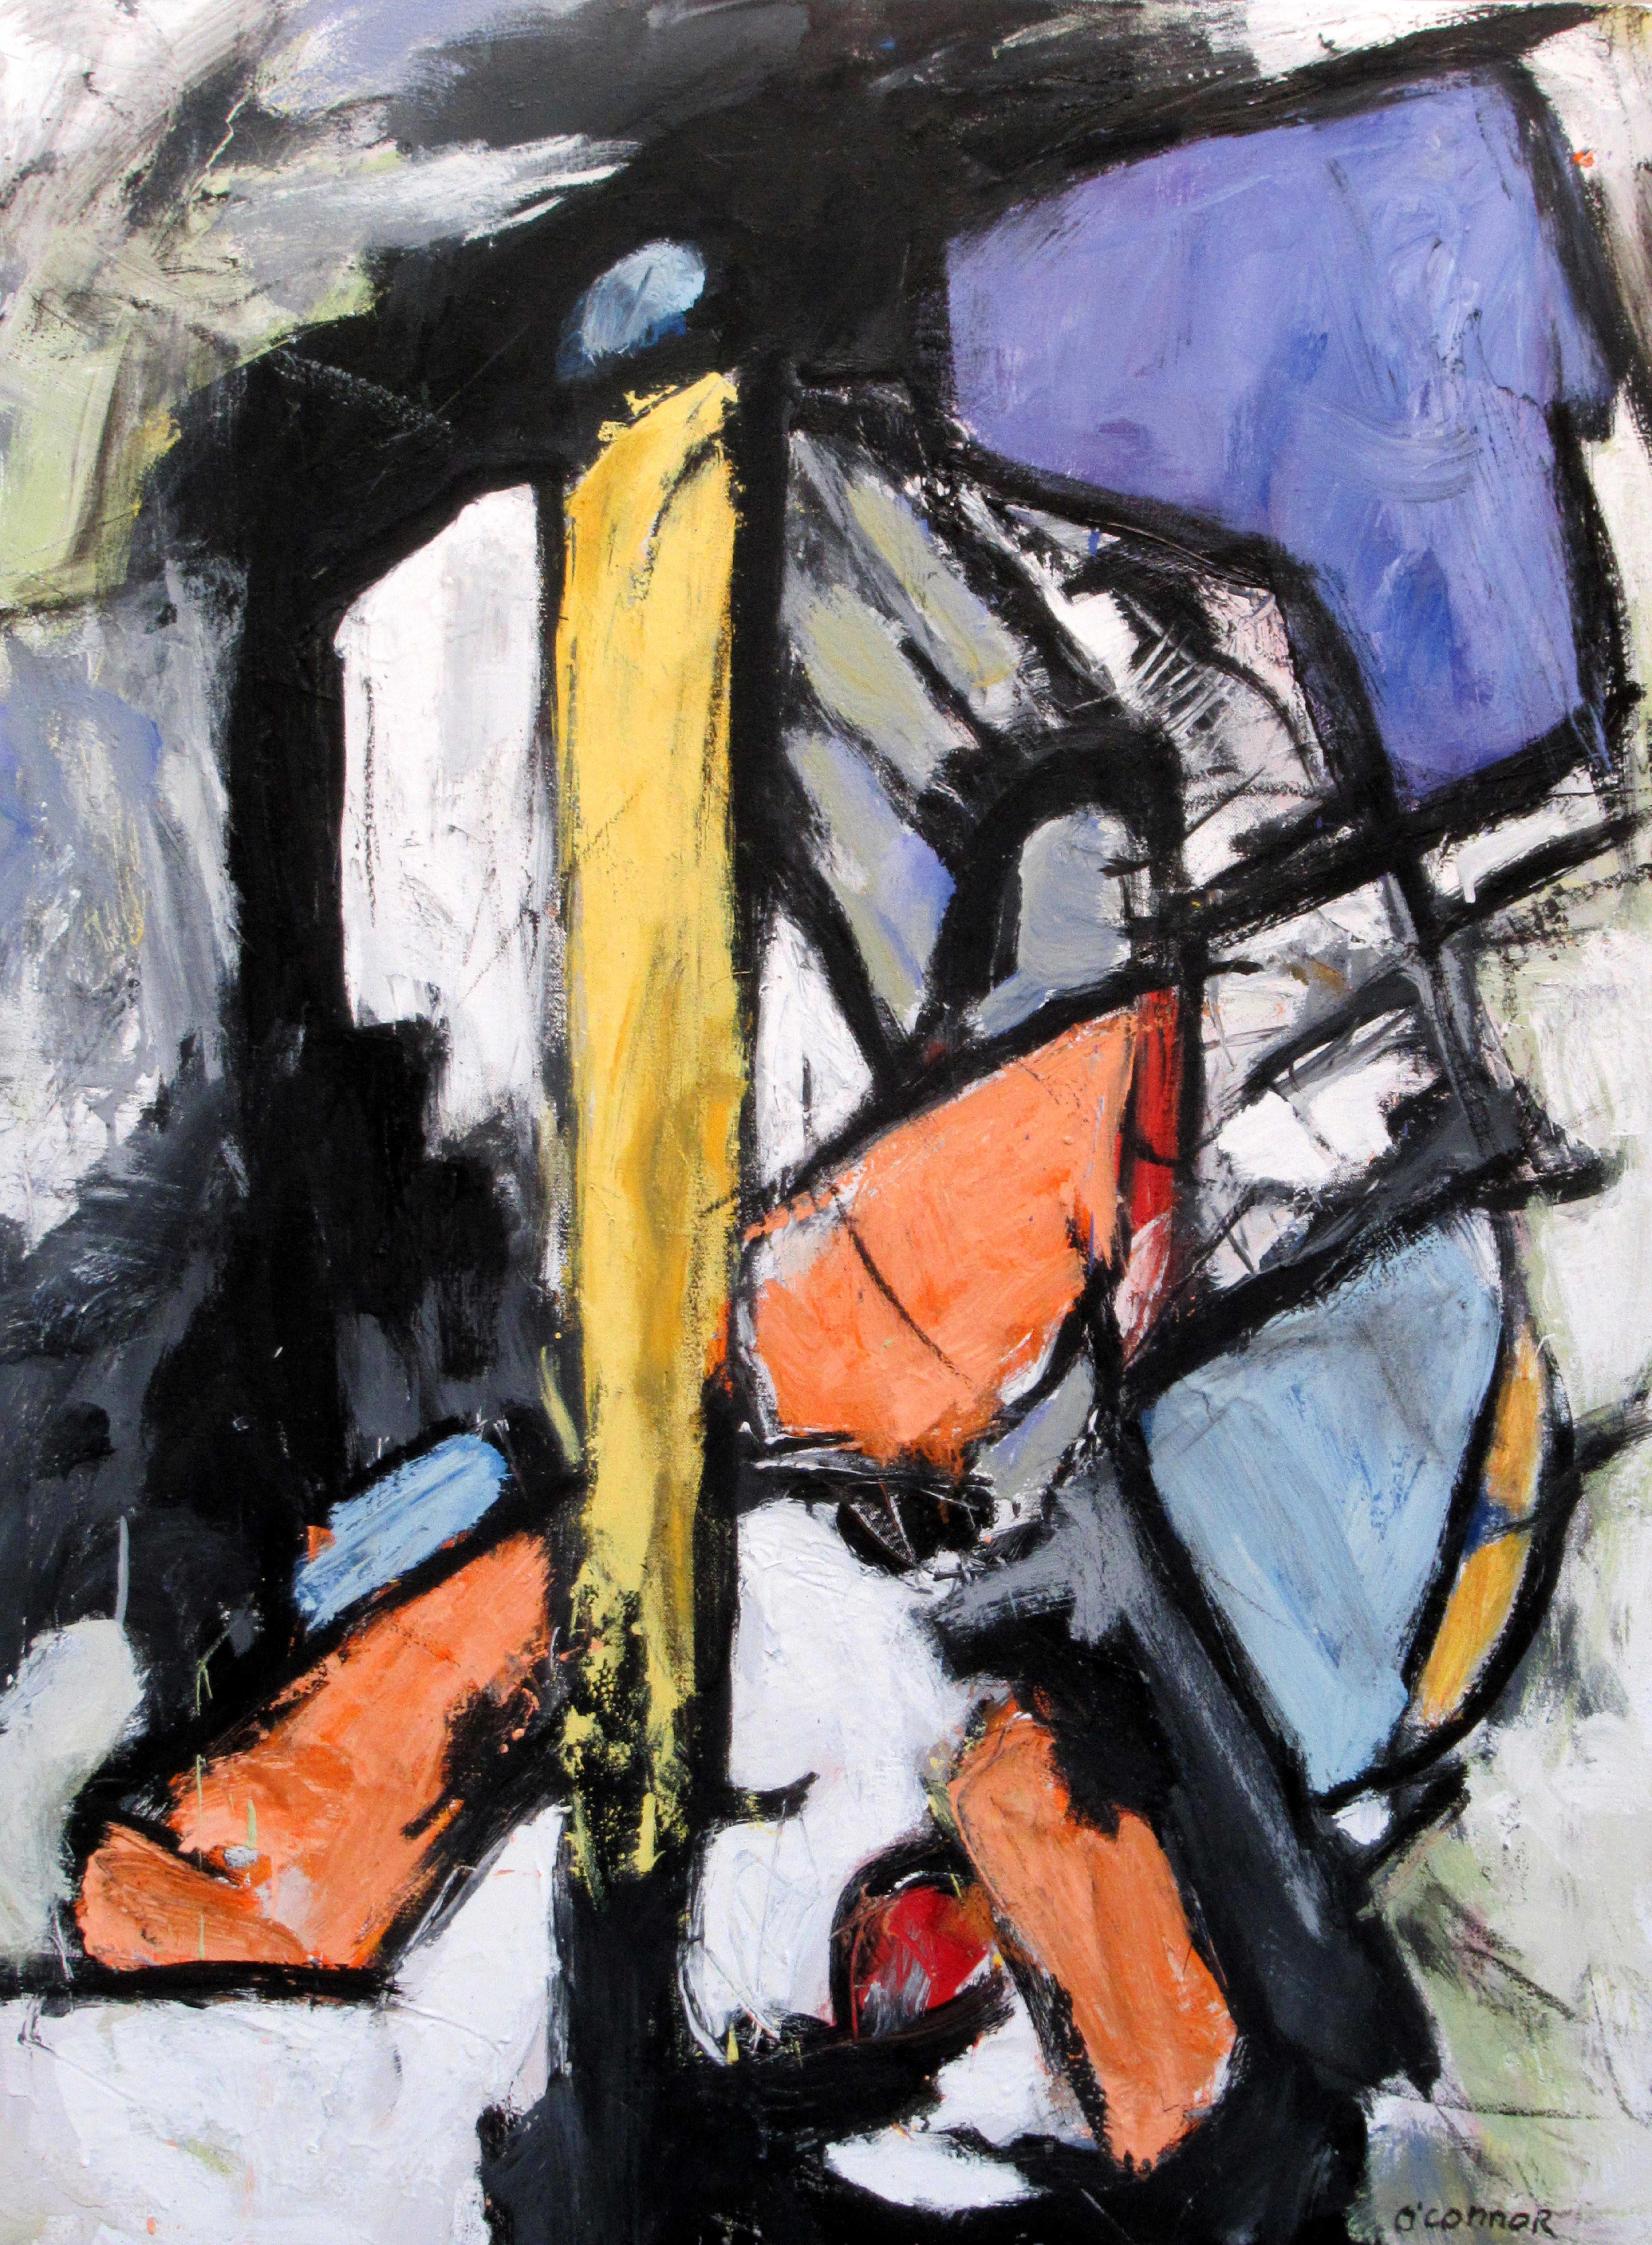 William O'Connor Abstract Painting - FORD, Original Signed Contemporary Abstract Expressionist Oil Painting on Canvas